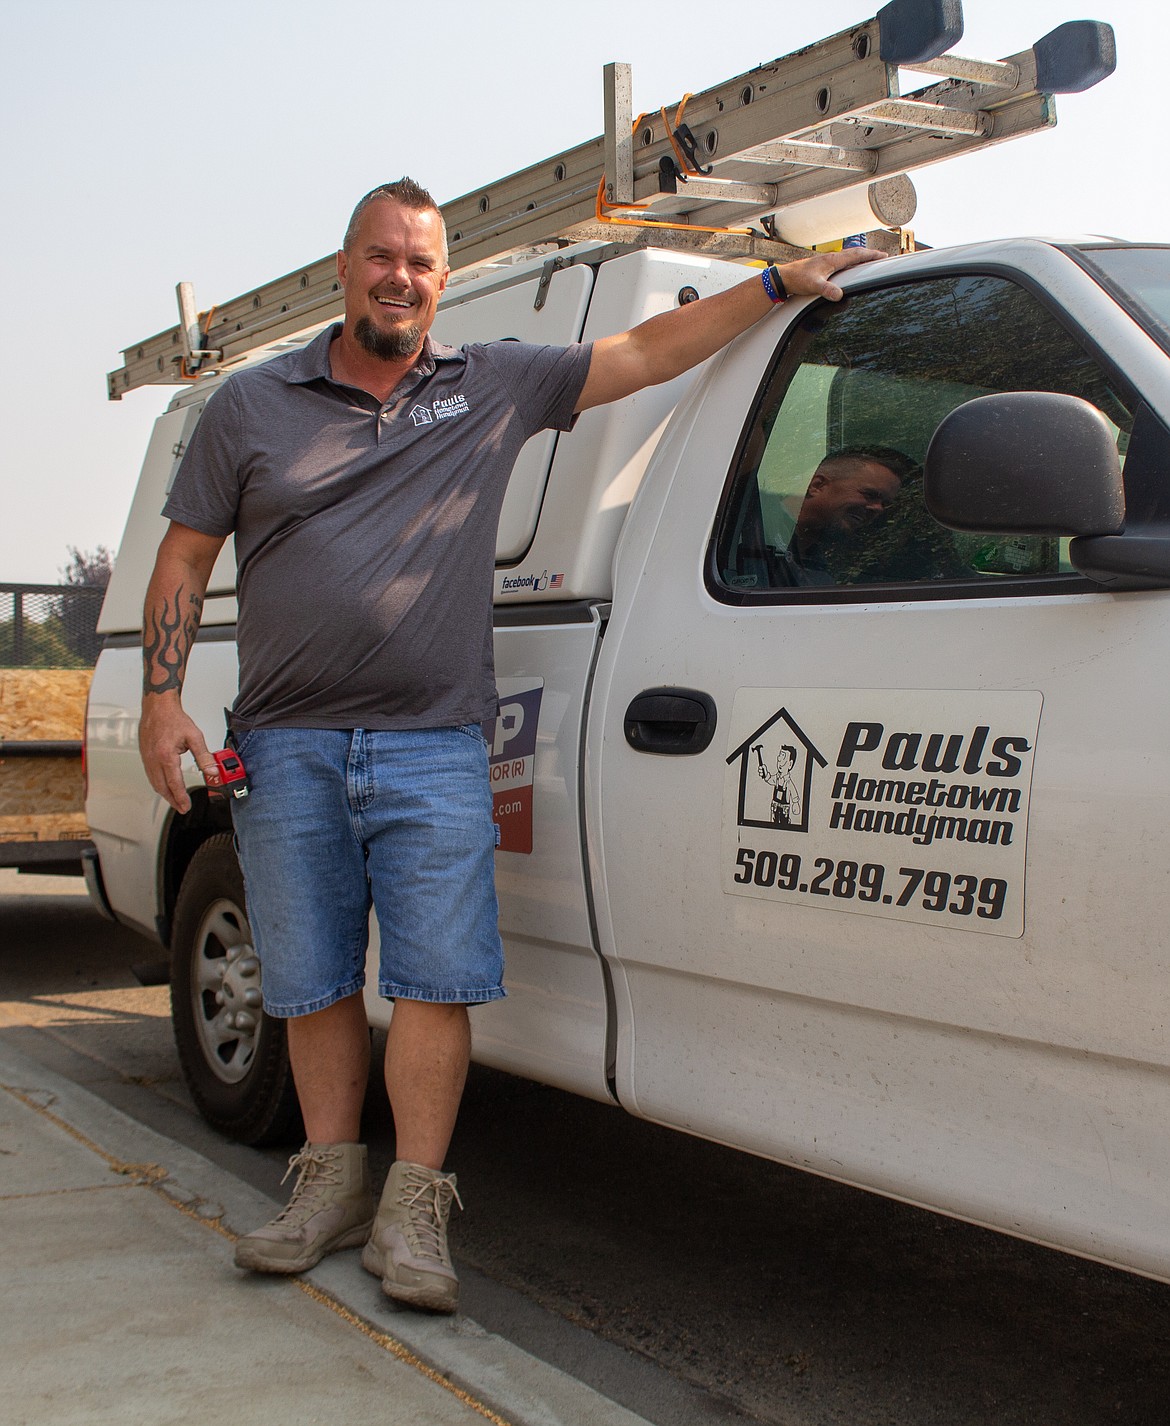 Paul Elsey, a local contractor in Quincy, has seen his business shift from primarily "honey-do list" projects to bigger remodels since people have been spending more time at home due to the coronavirus.